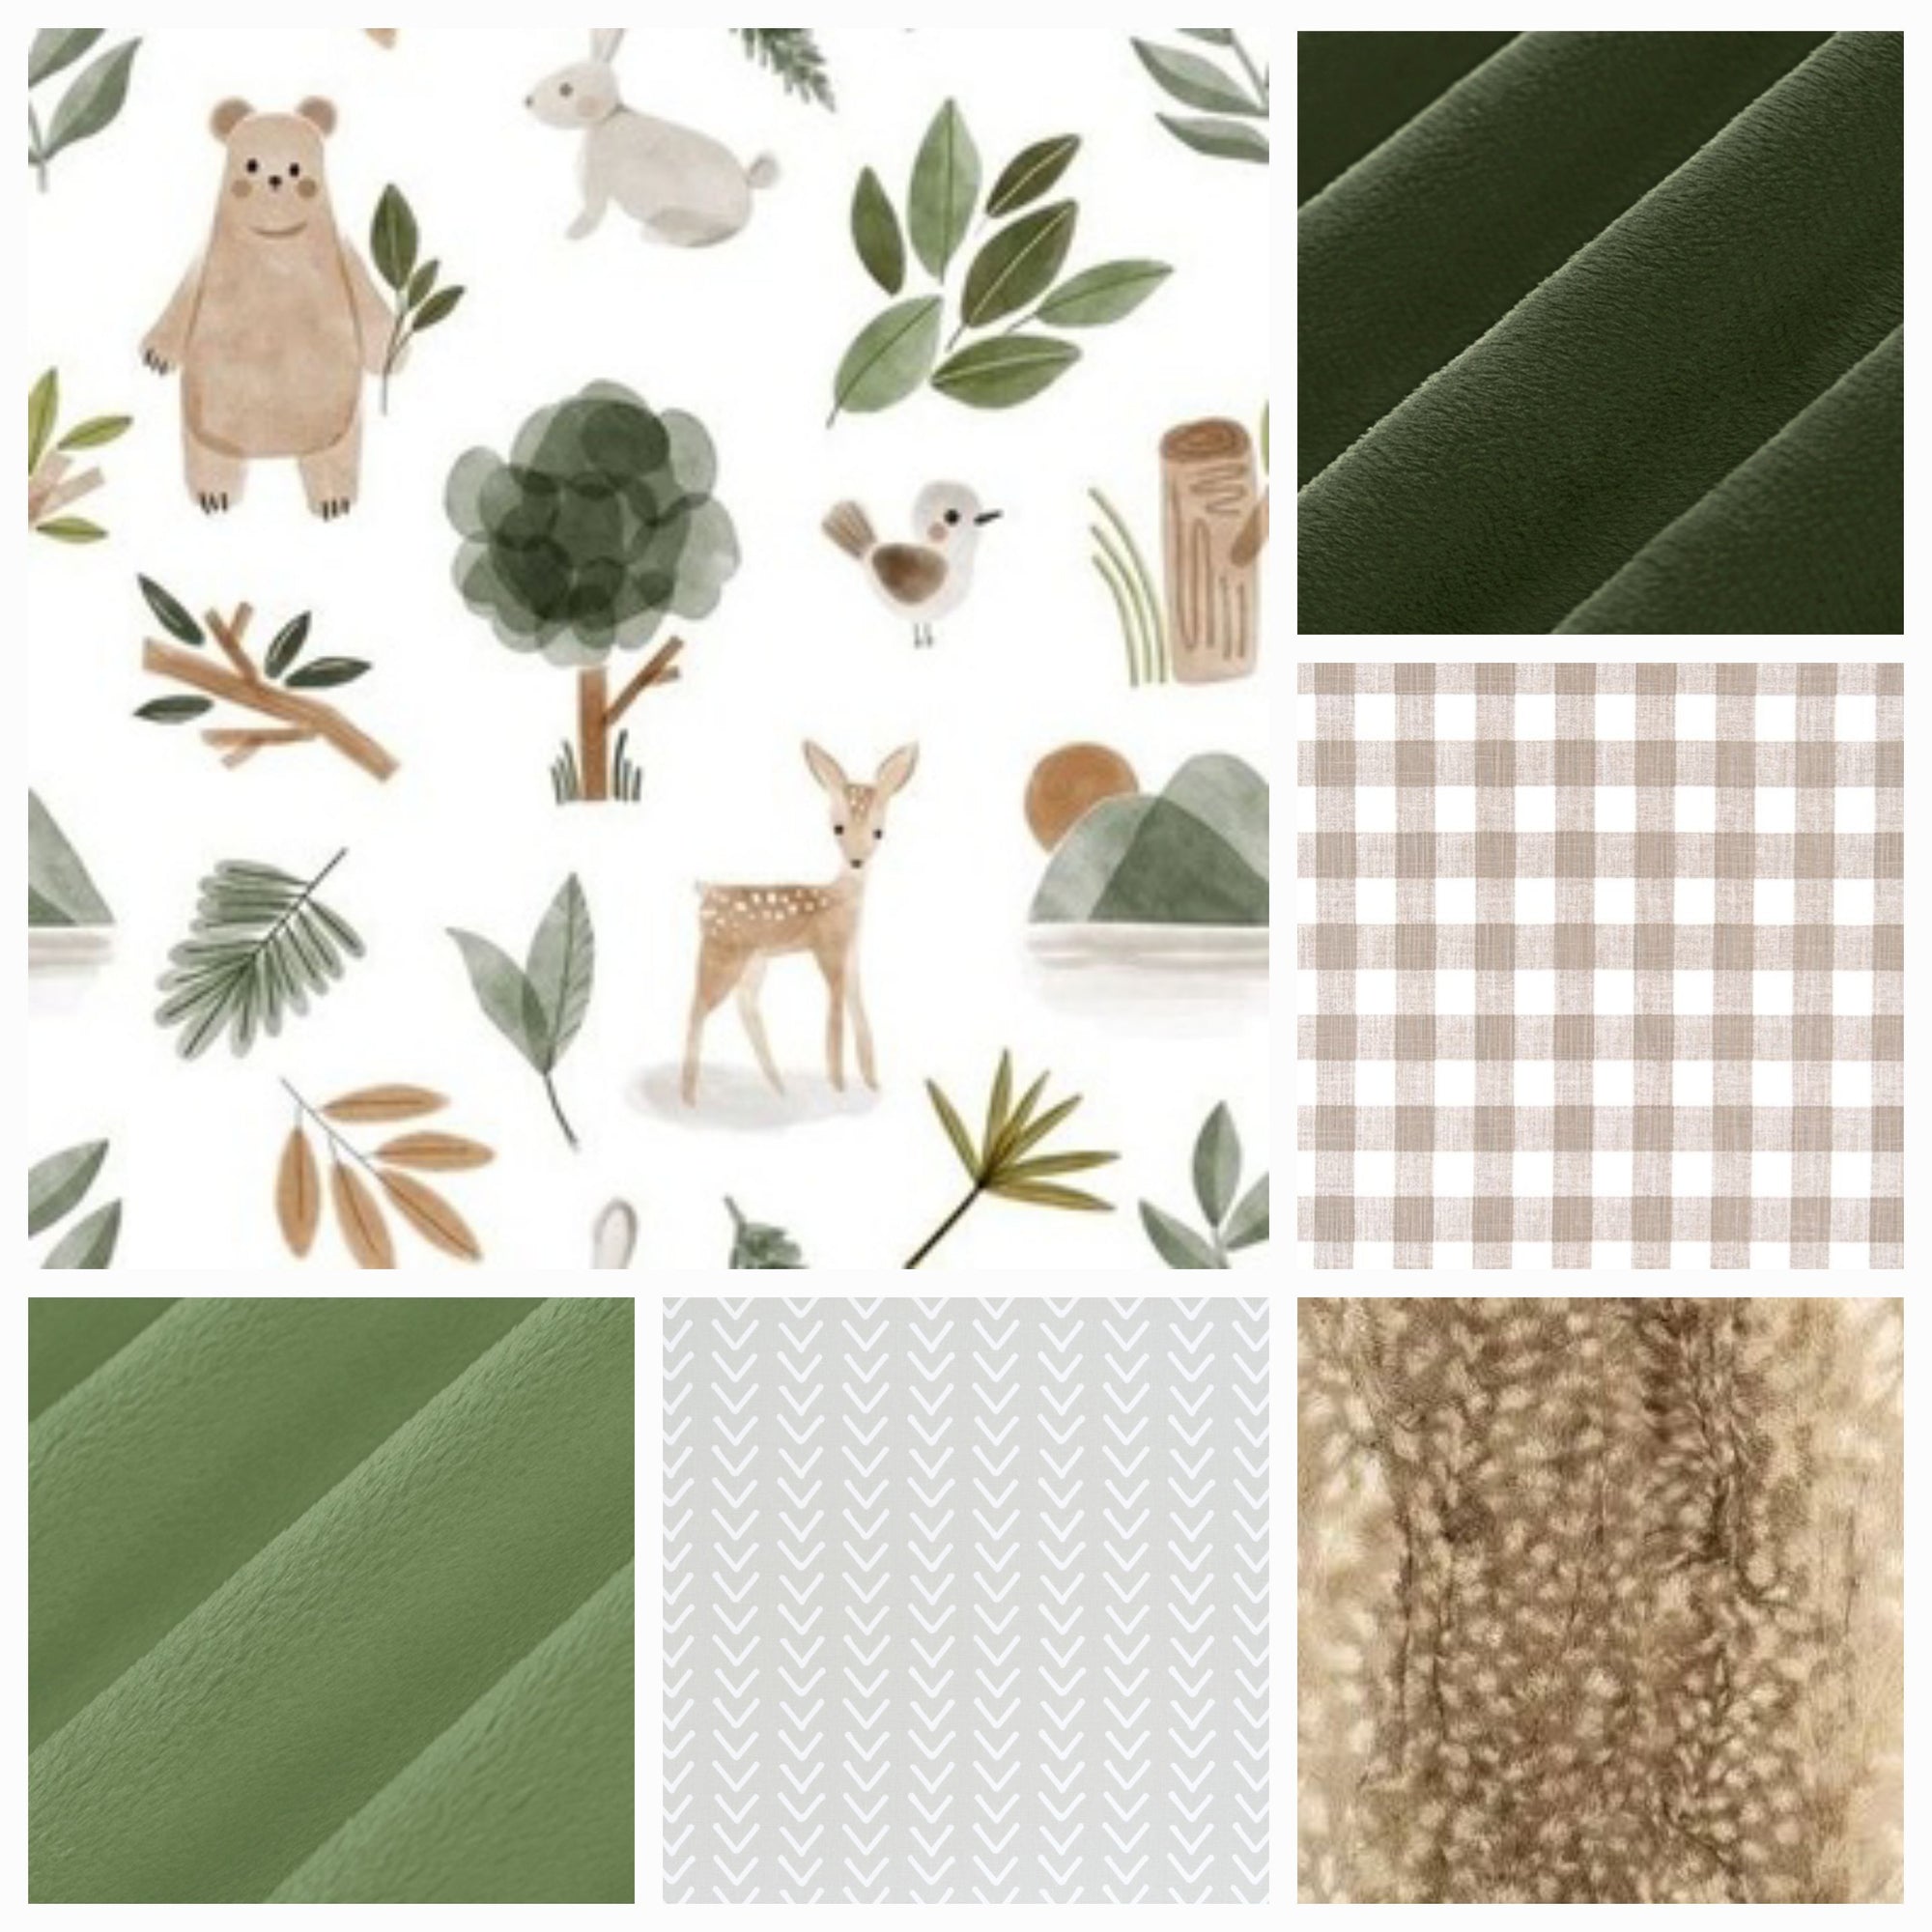 New Release Neutral Crib Bedding- Deer and Bear Woodland Baby & Toddler Bedding Collection - DBC Baby Bedding Co 